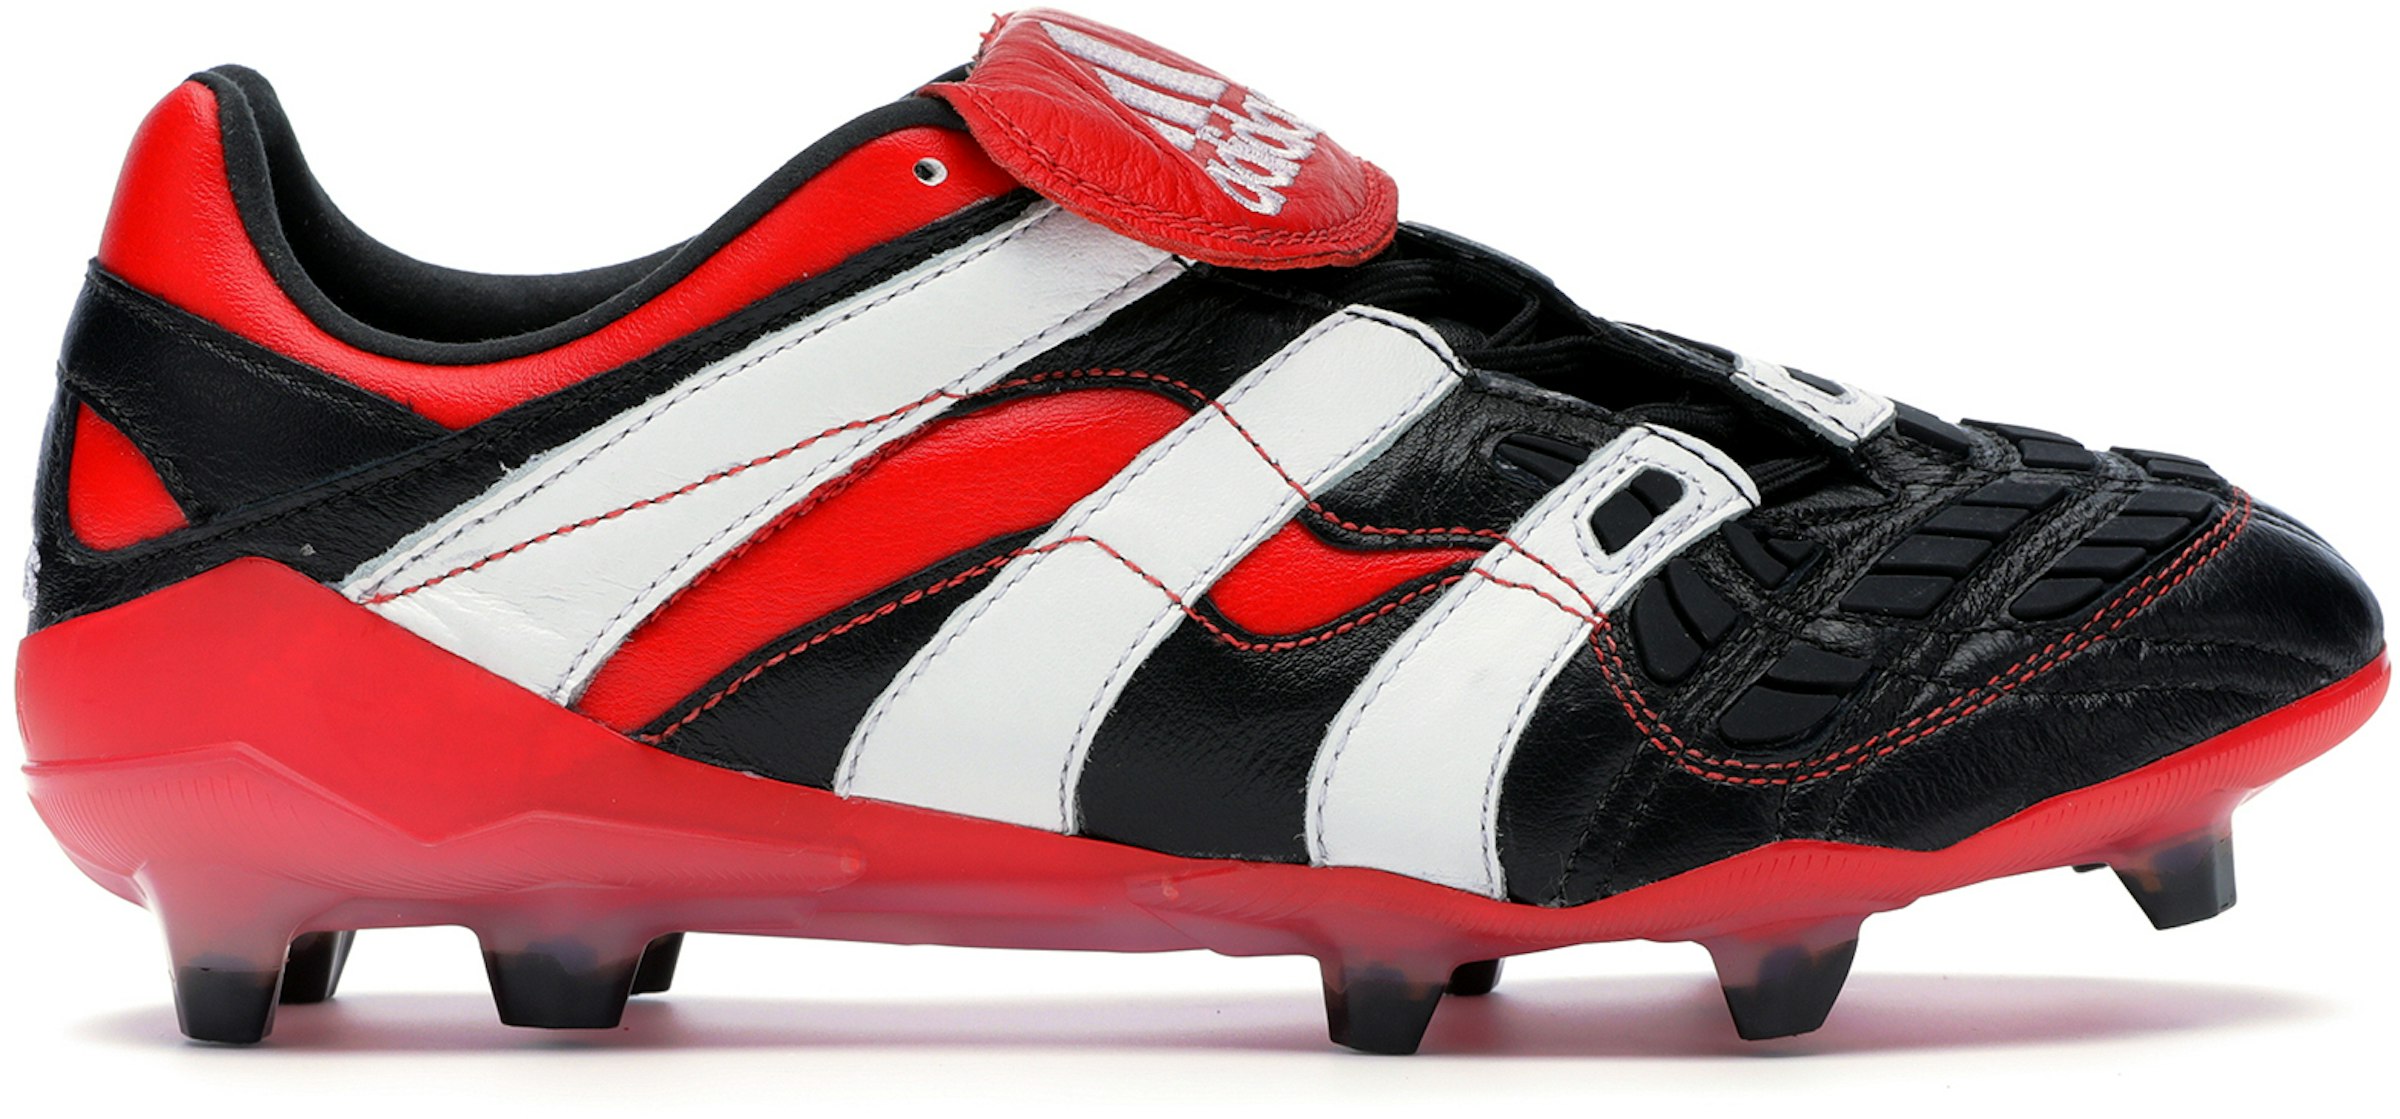 adidas Predator Accelerator Firm Ground Cleat Black White Red Men's D96665 - US